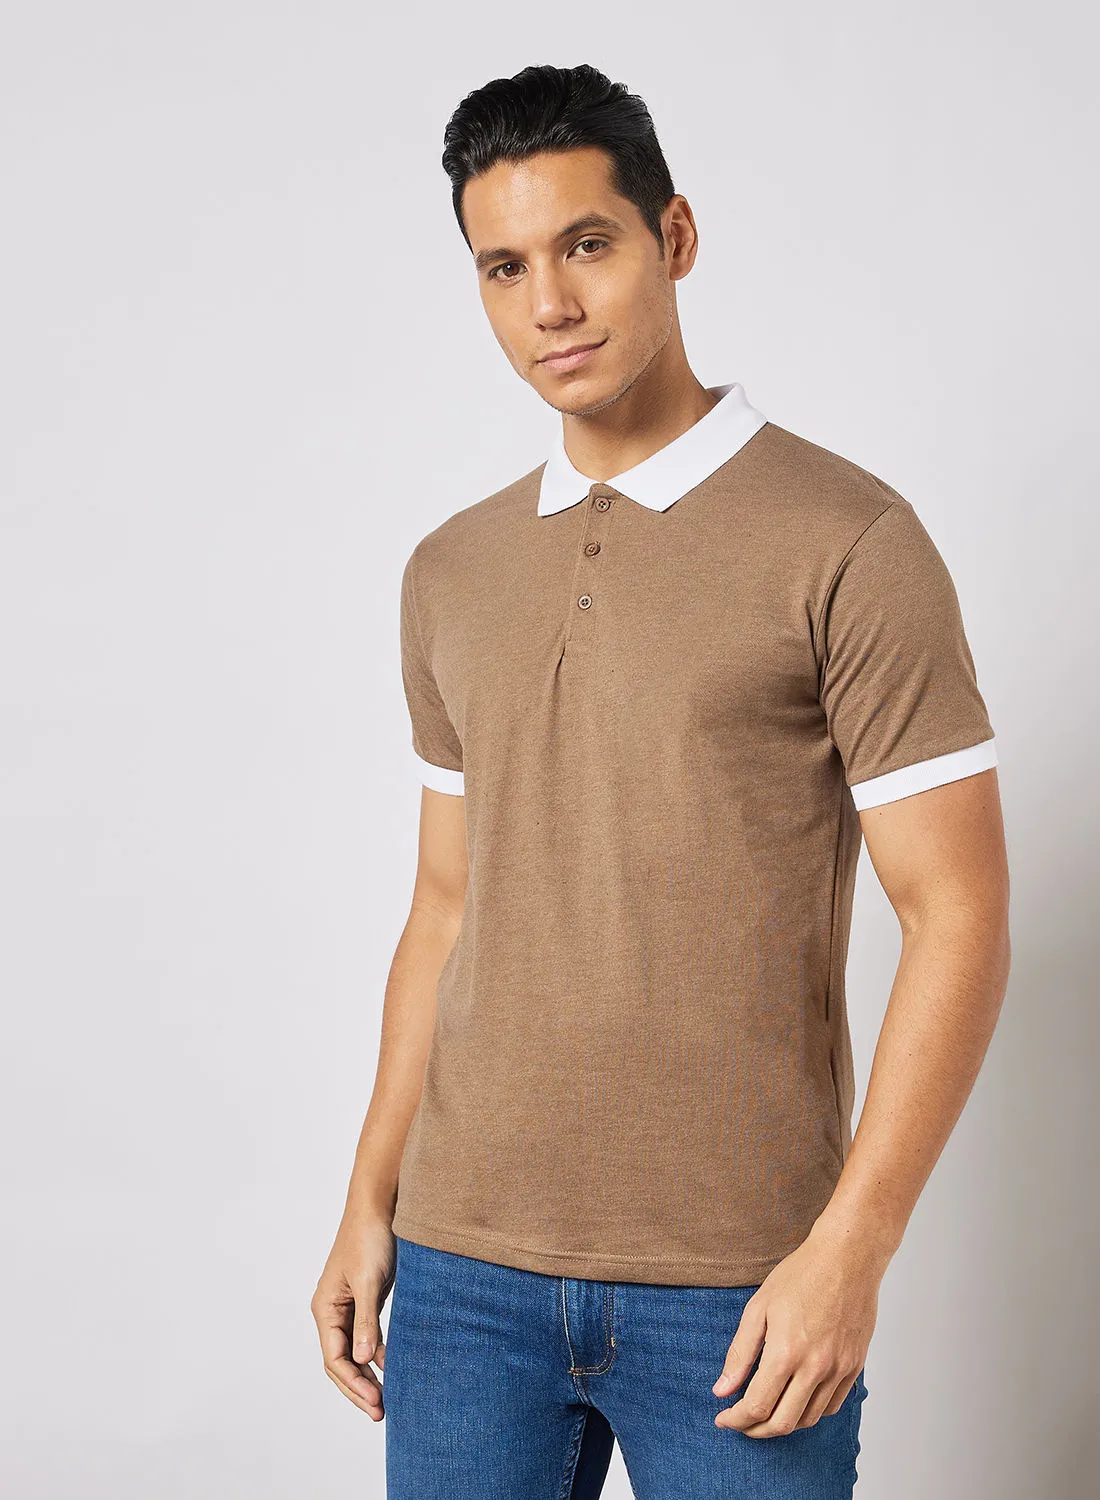 Noon East Men's Basic Casual Polo Cotton T-Shirt with contrast details in Regular Fit Heather Brown